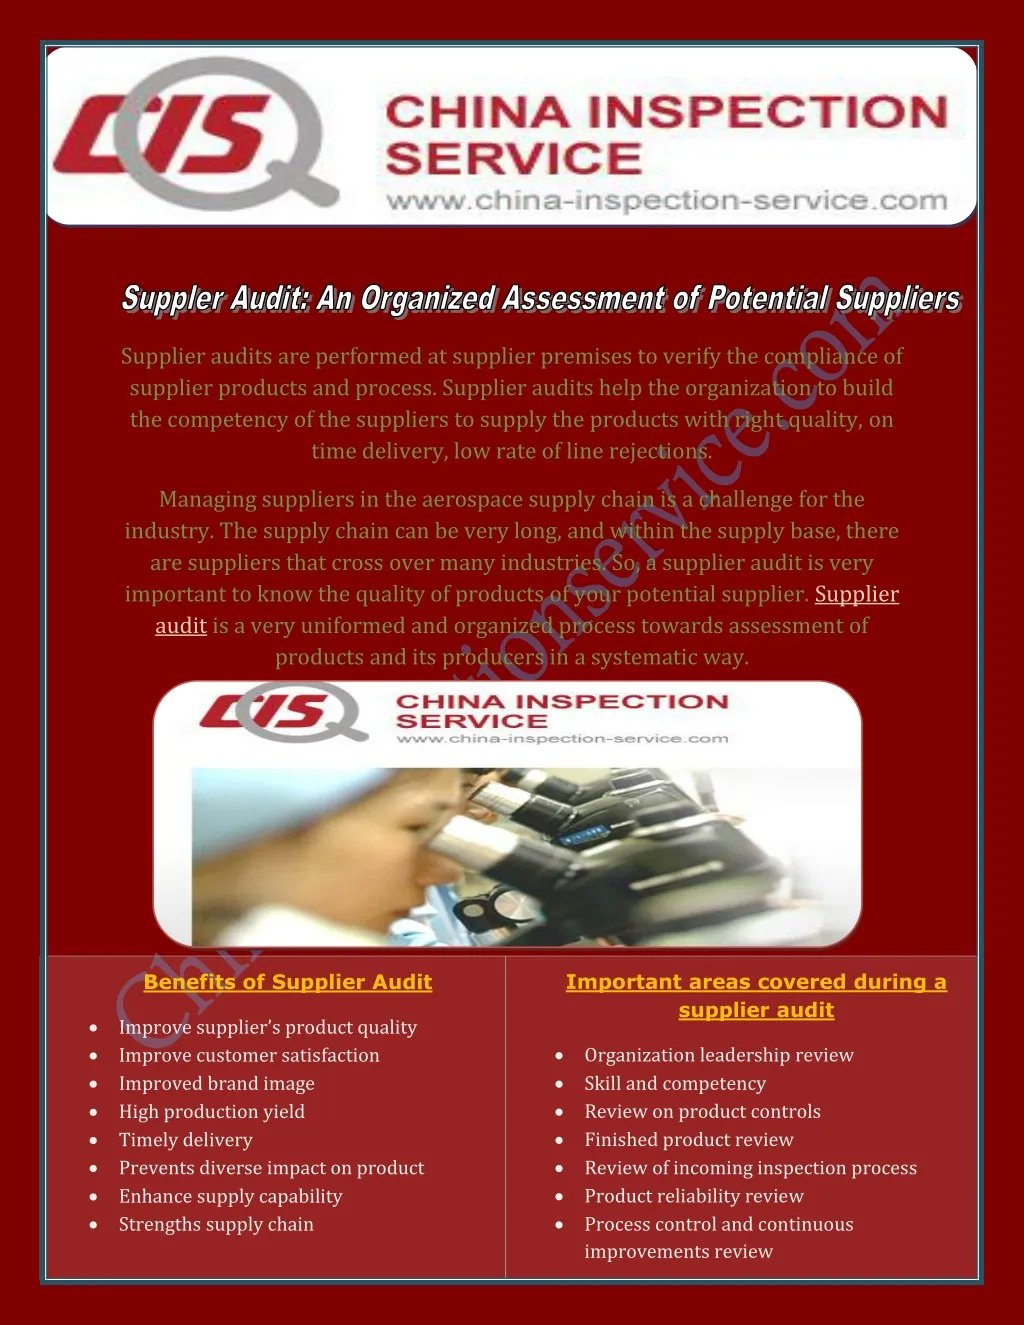 supplier audits are performed at supplier